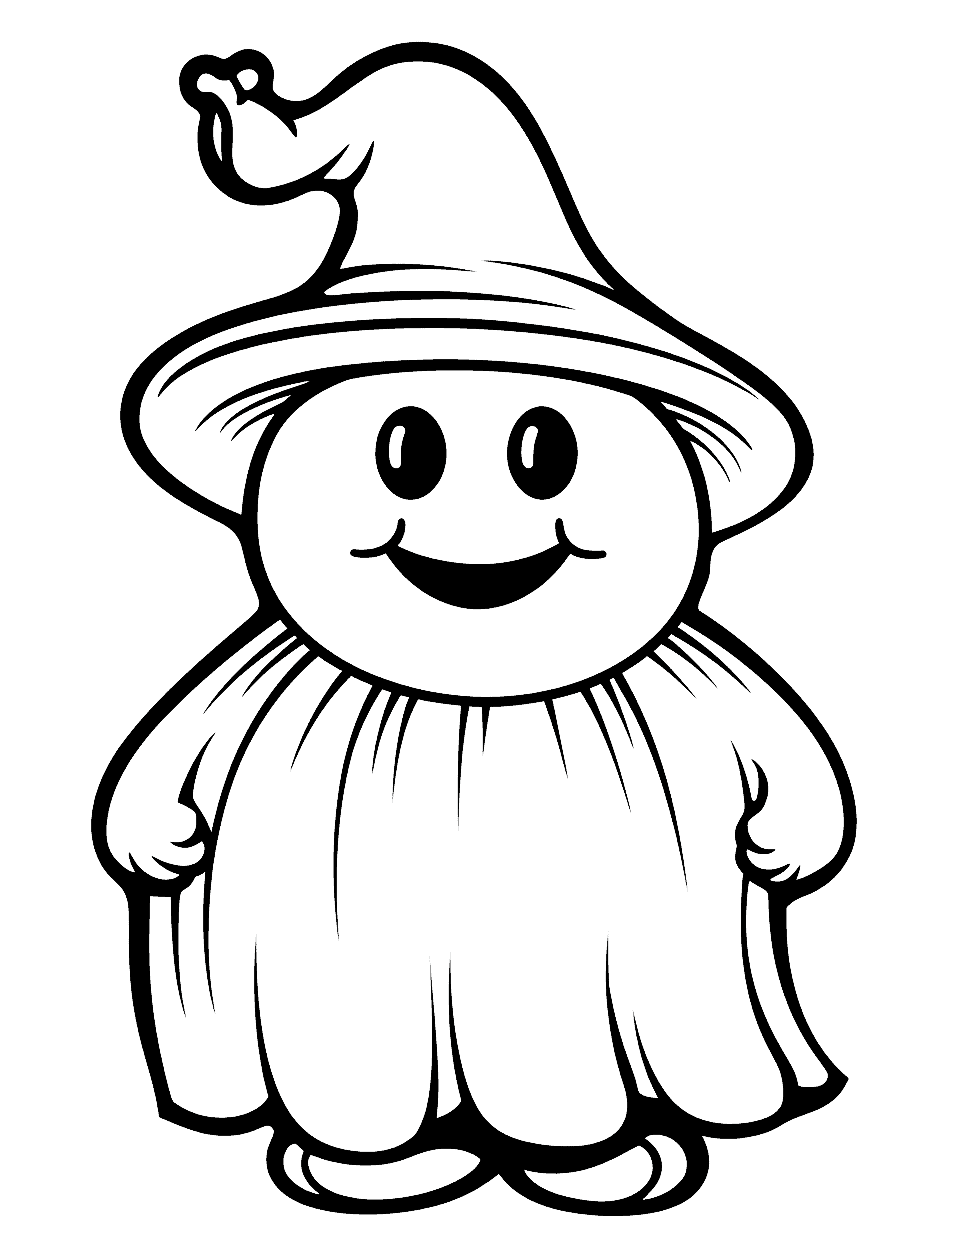 Toddler-Friendly Ghost Halloween Coloring Page - A cute and friendly ghost, perfect for toddlers to color with their favorite crayons.